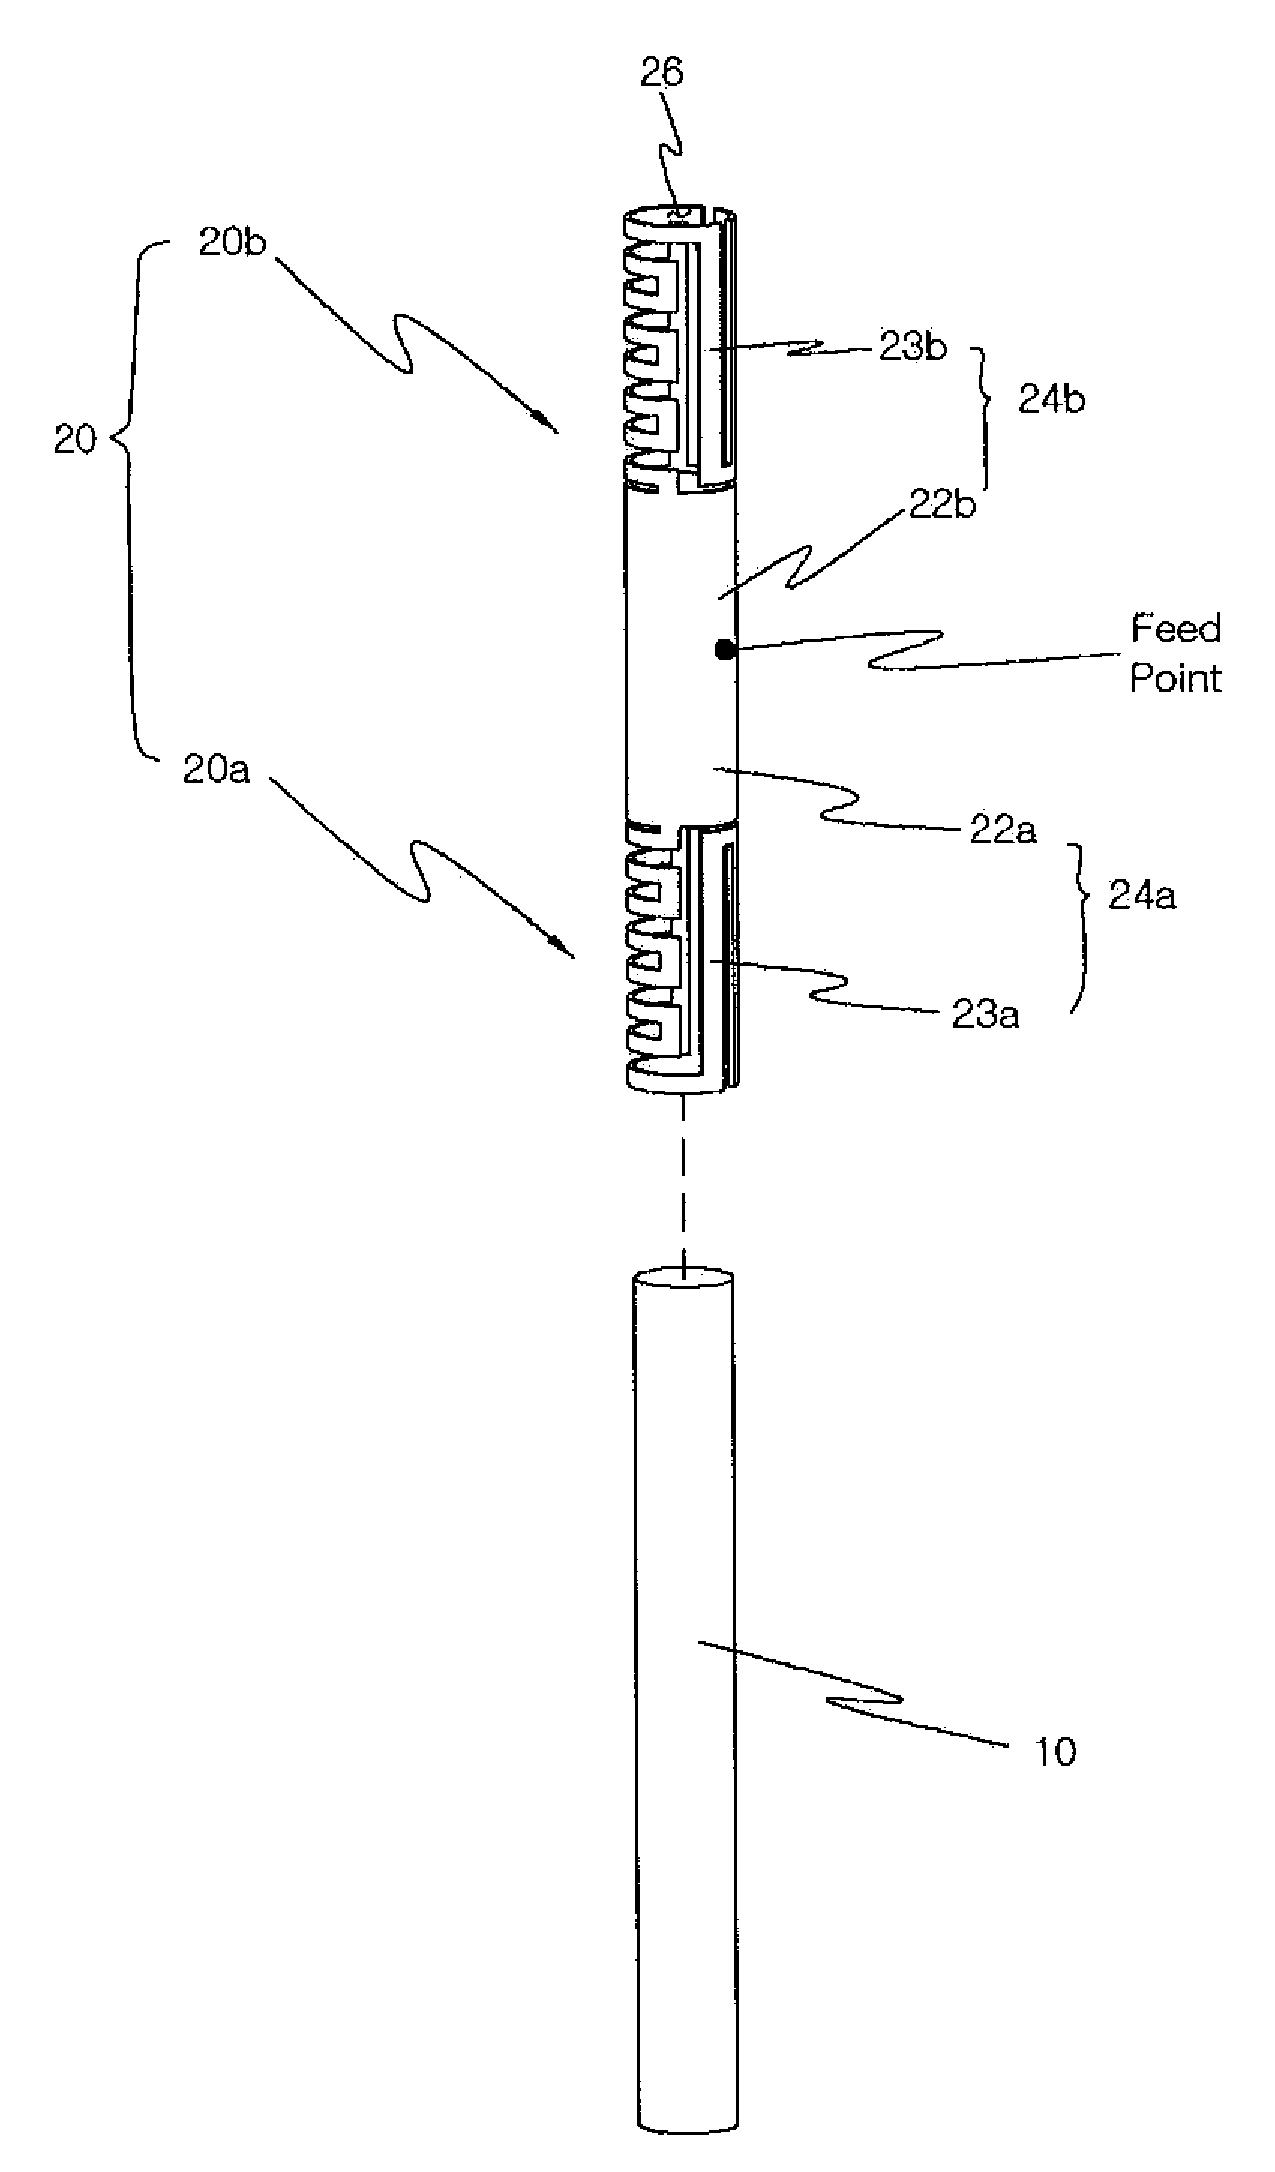 Embedded chip antenna having complementary radiator structure